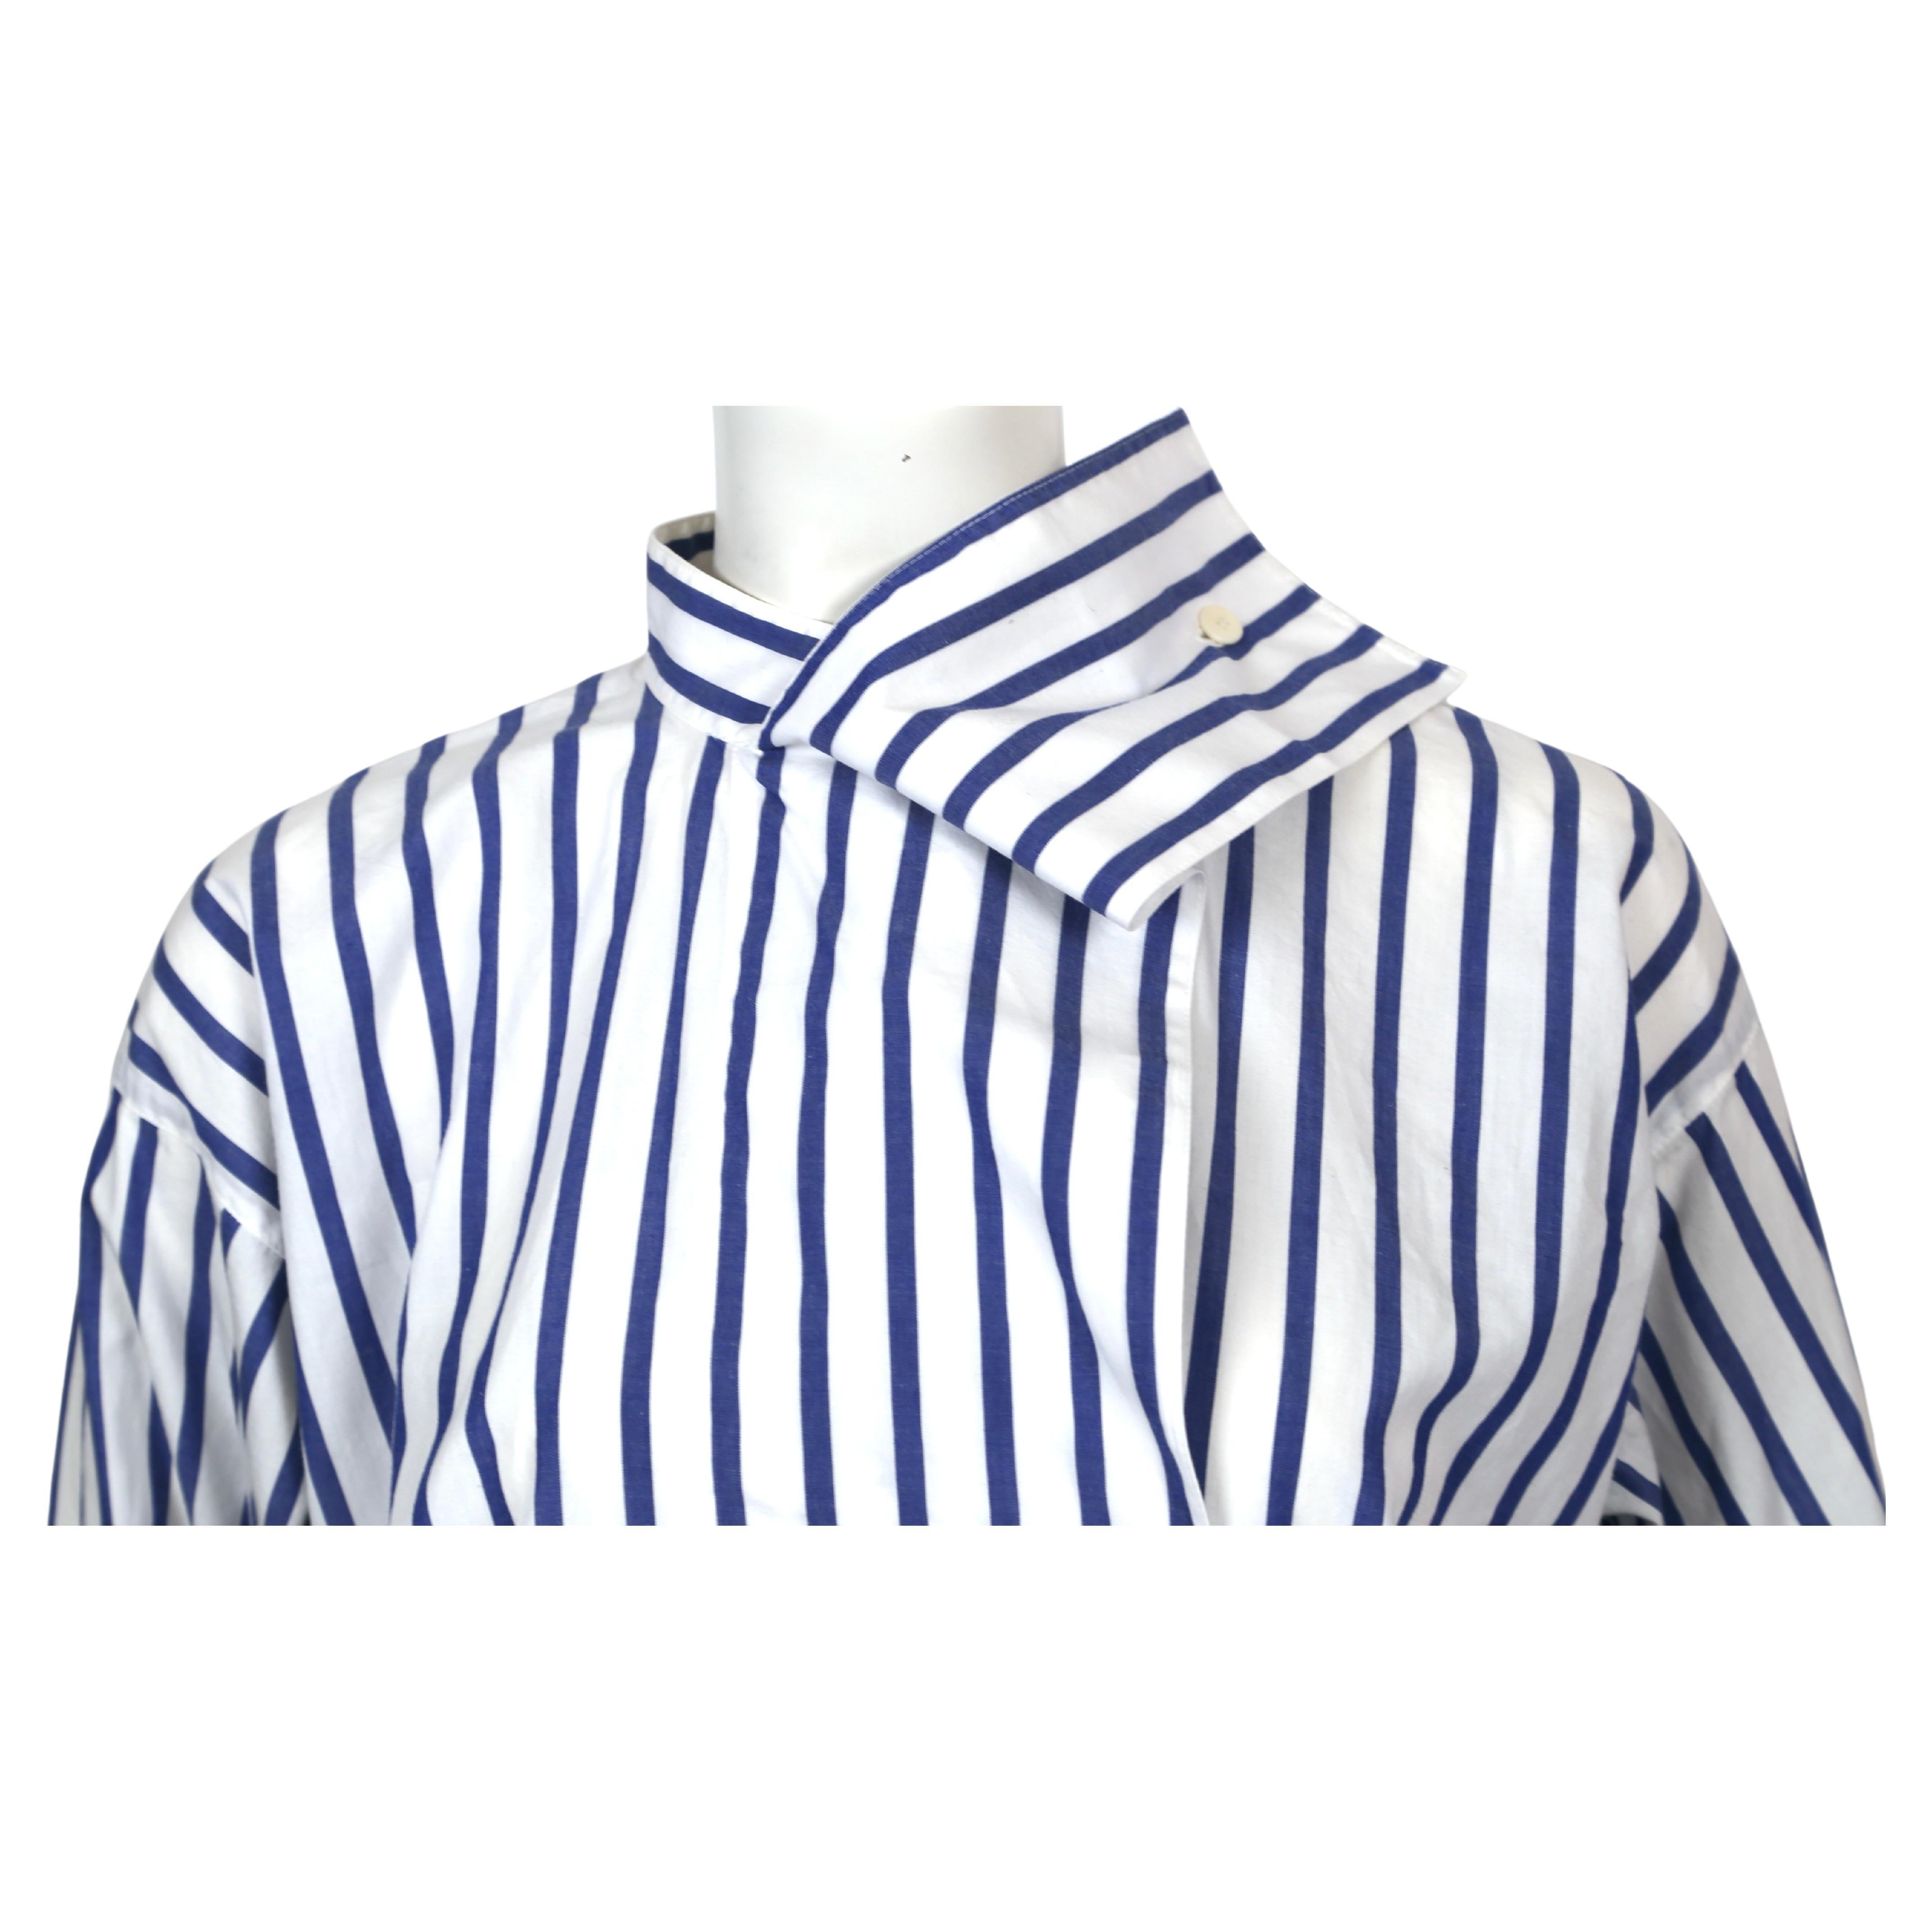 Blue and white striped cotton shirt with draped neckline and asymmetrical button closure designed by Issey Miyake dating to the early 1980's. Labeled a size 'S', however this shirt fits oversized and will fit many sizes. Approximate measurements